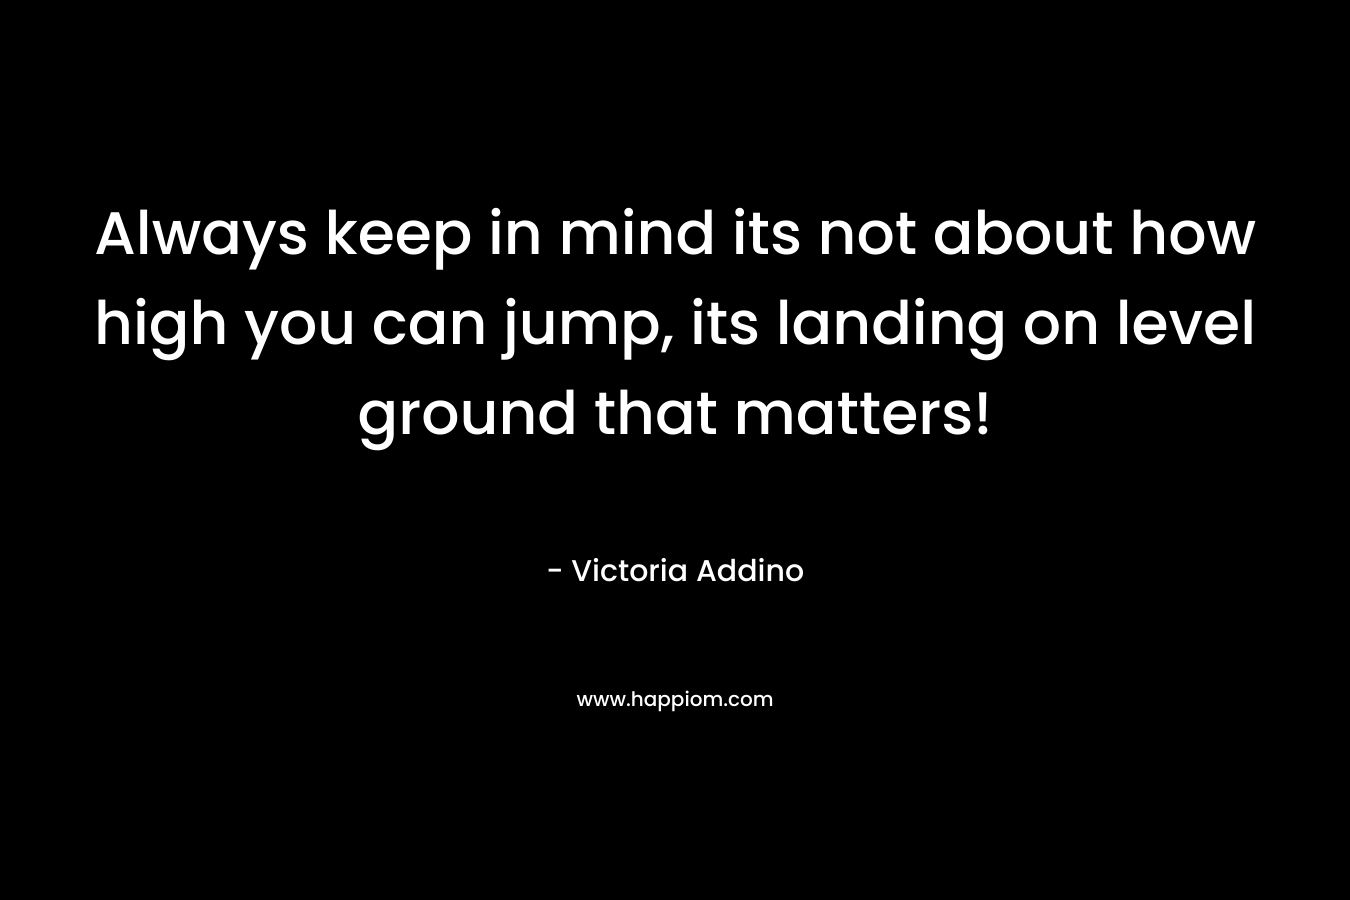 Always keep in mind its not about how high you can jump, its landing on level ground that matters!